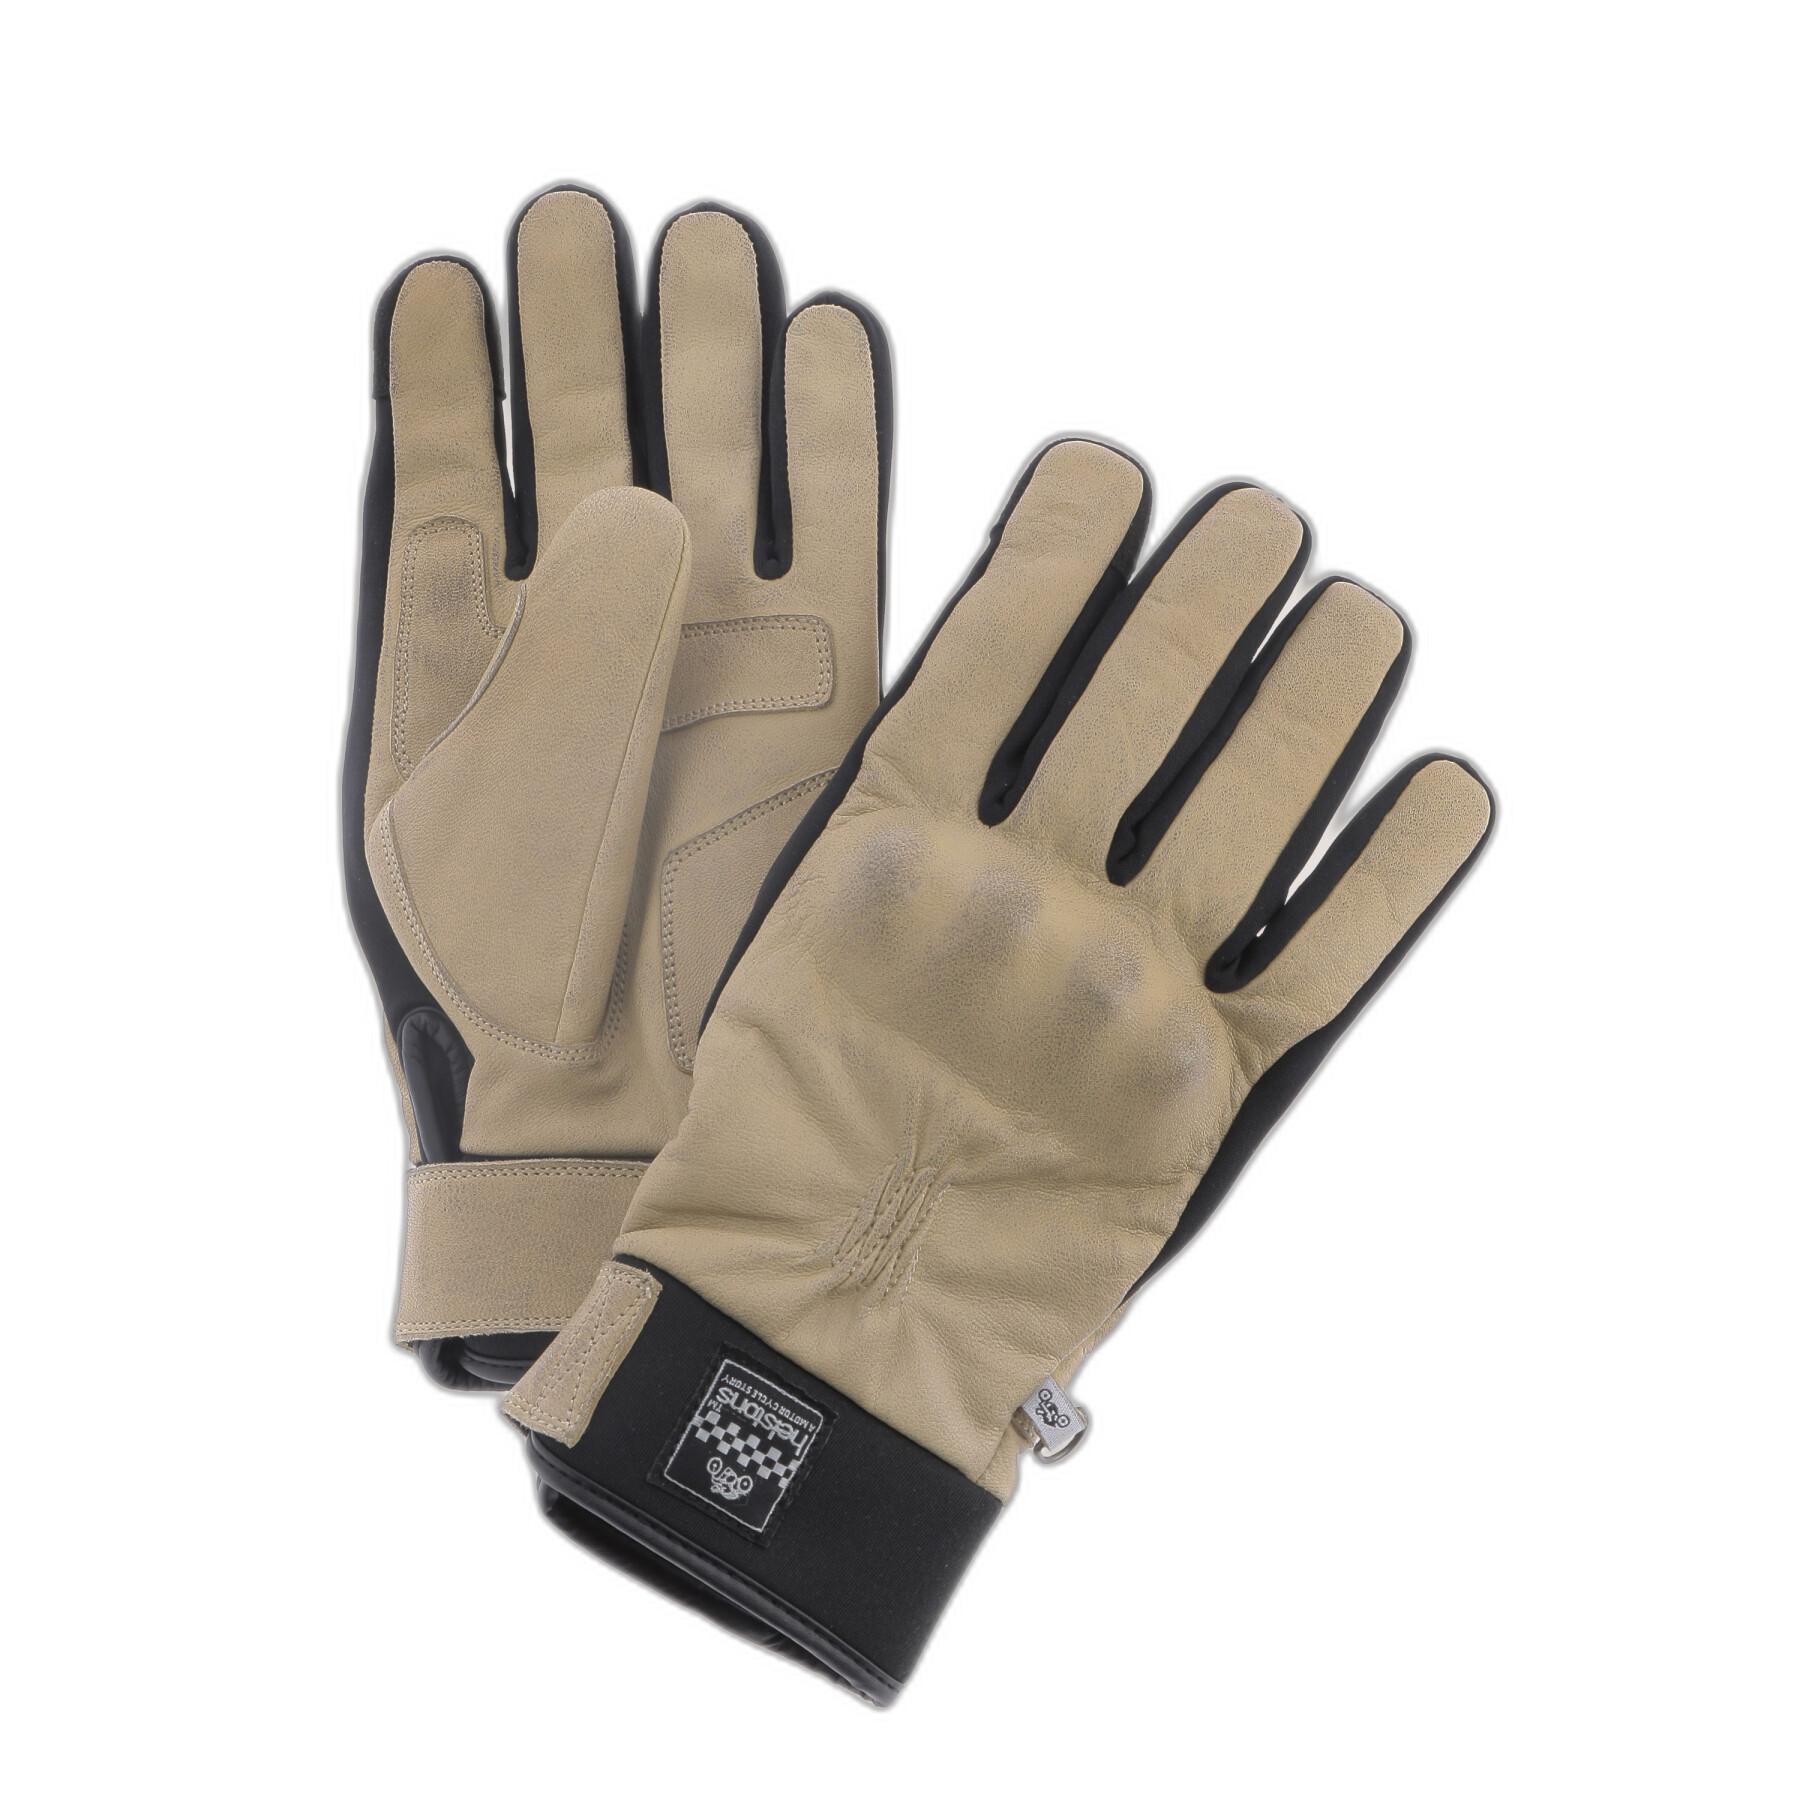 Winter leather motorcycle gloves Helstons Justin